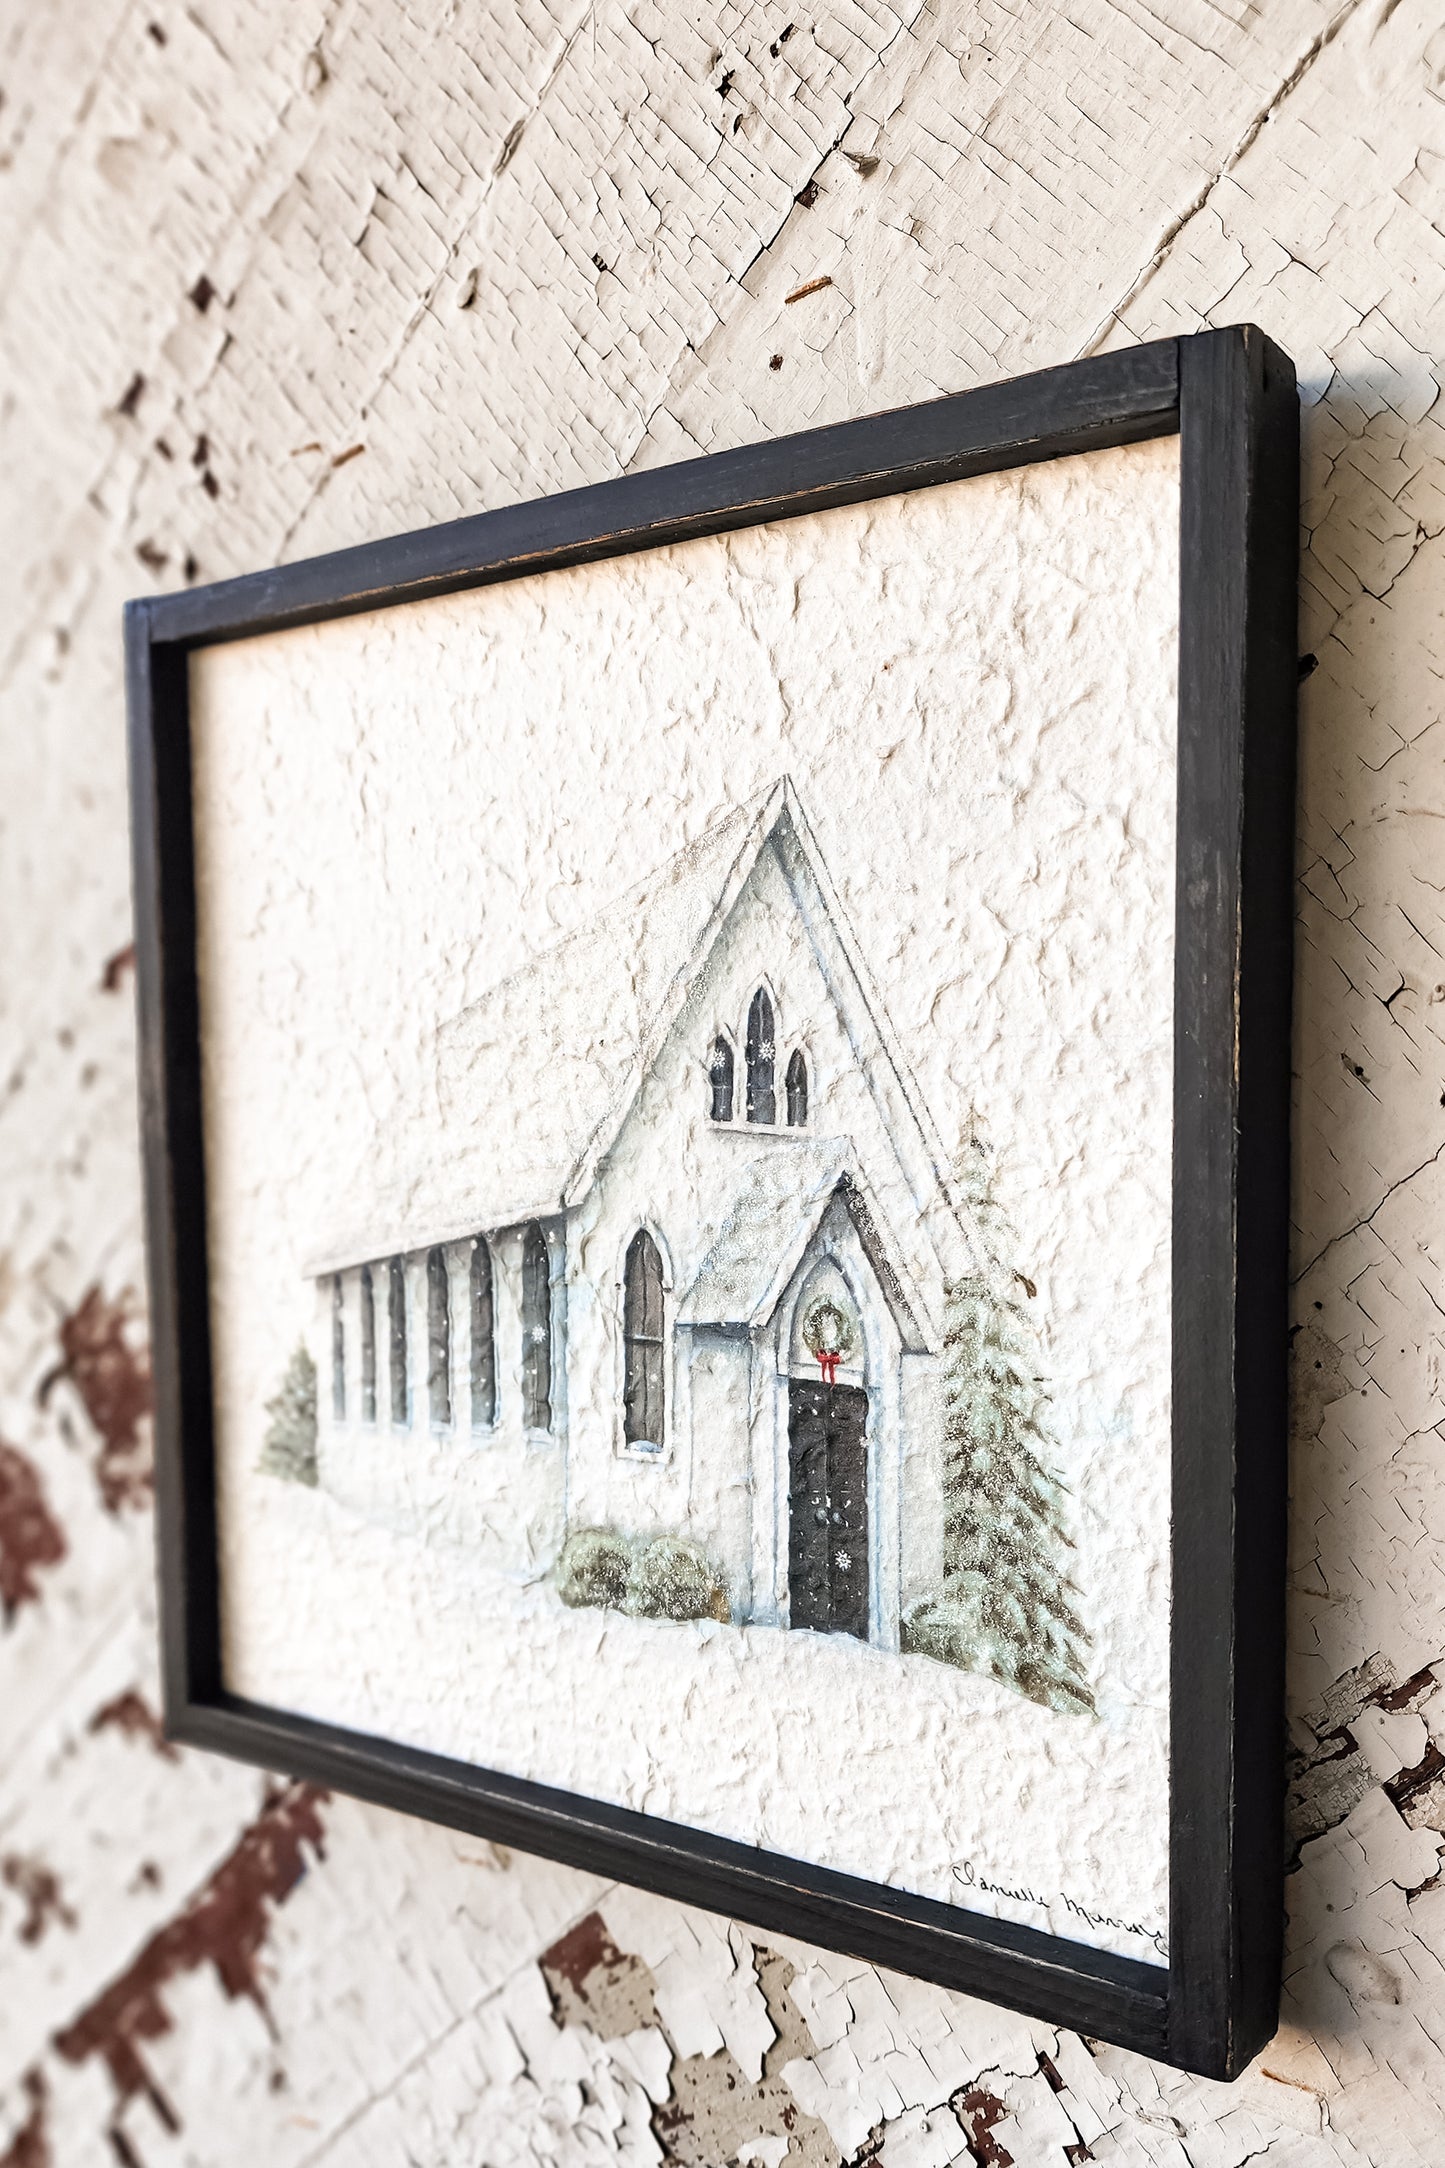 Framed Church on Textured Paper